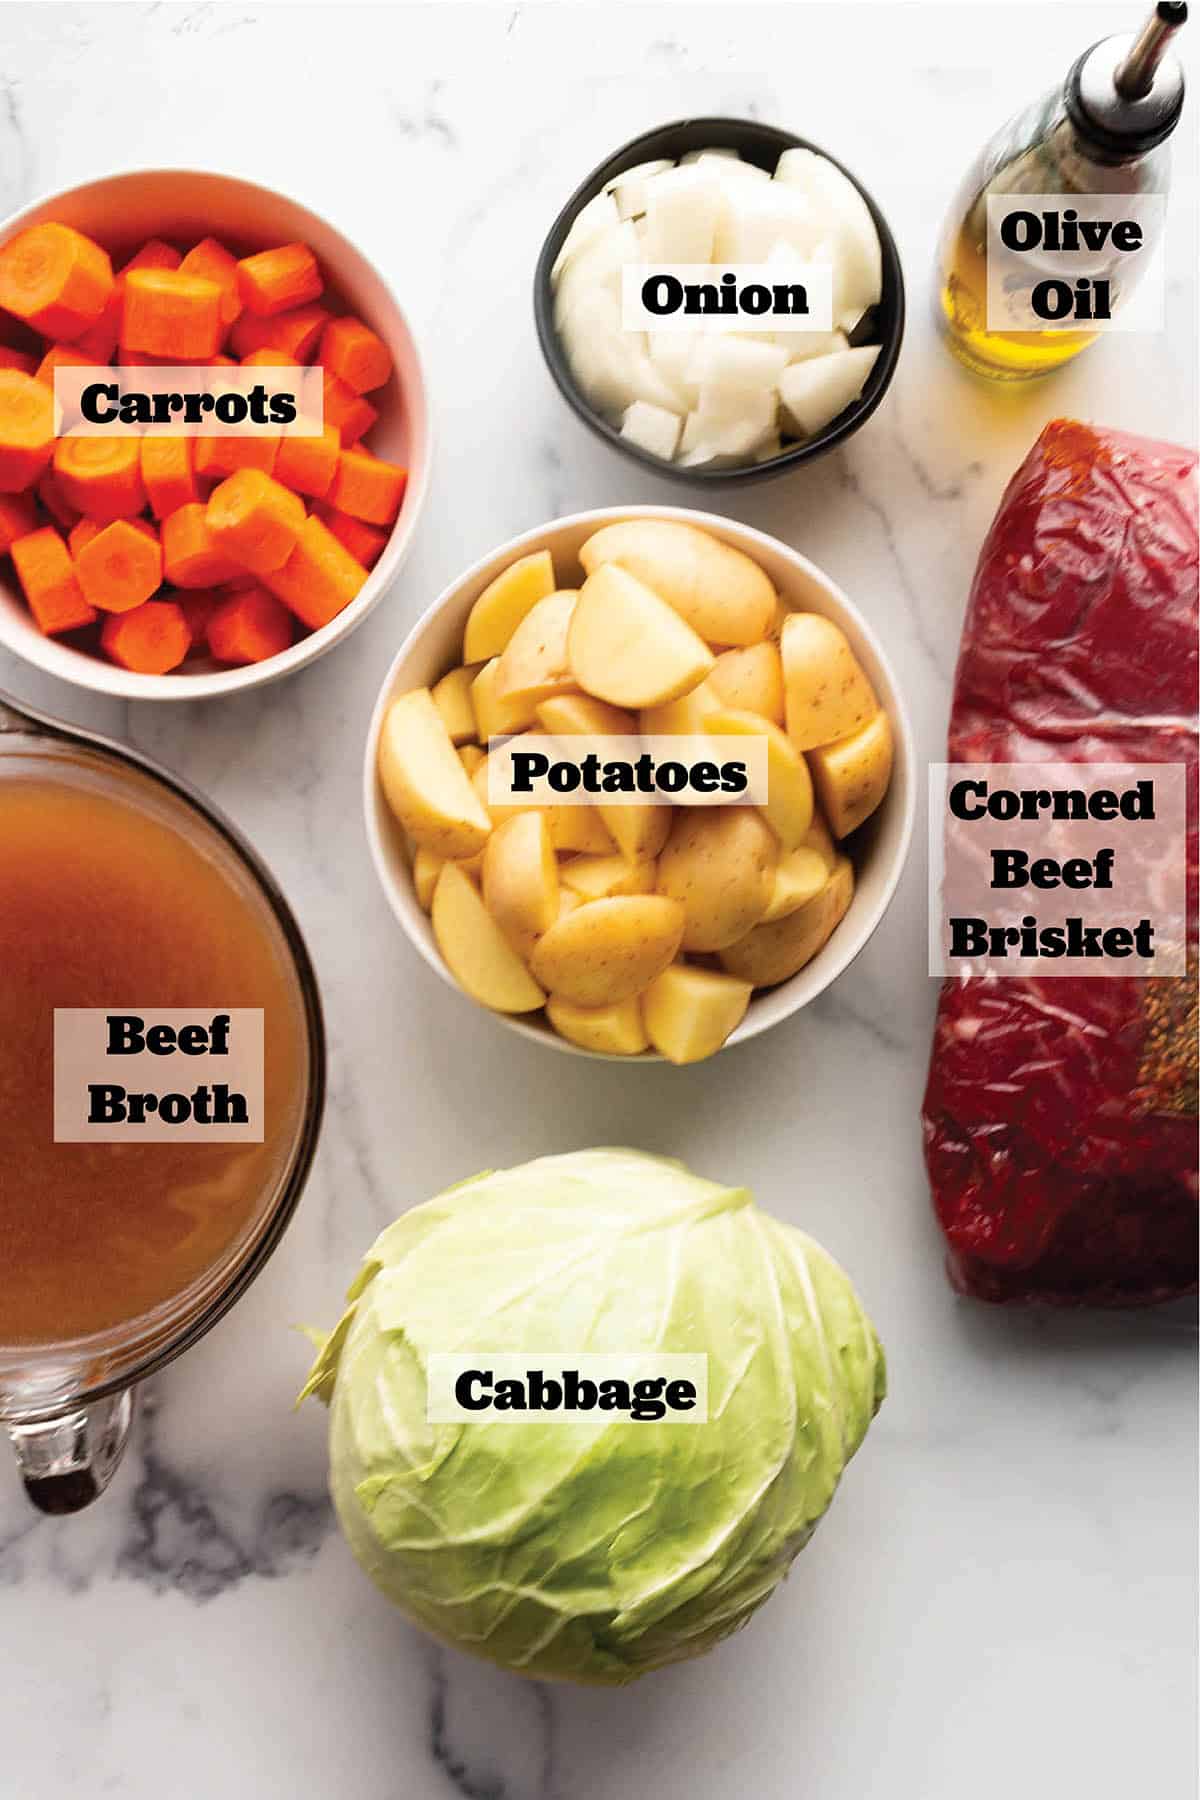 Prep bowls with chopped carrots, onions, potatoes, a head of cabbage, bowl of beef broth and a corned beef brisket and olive oil.